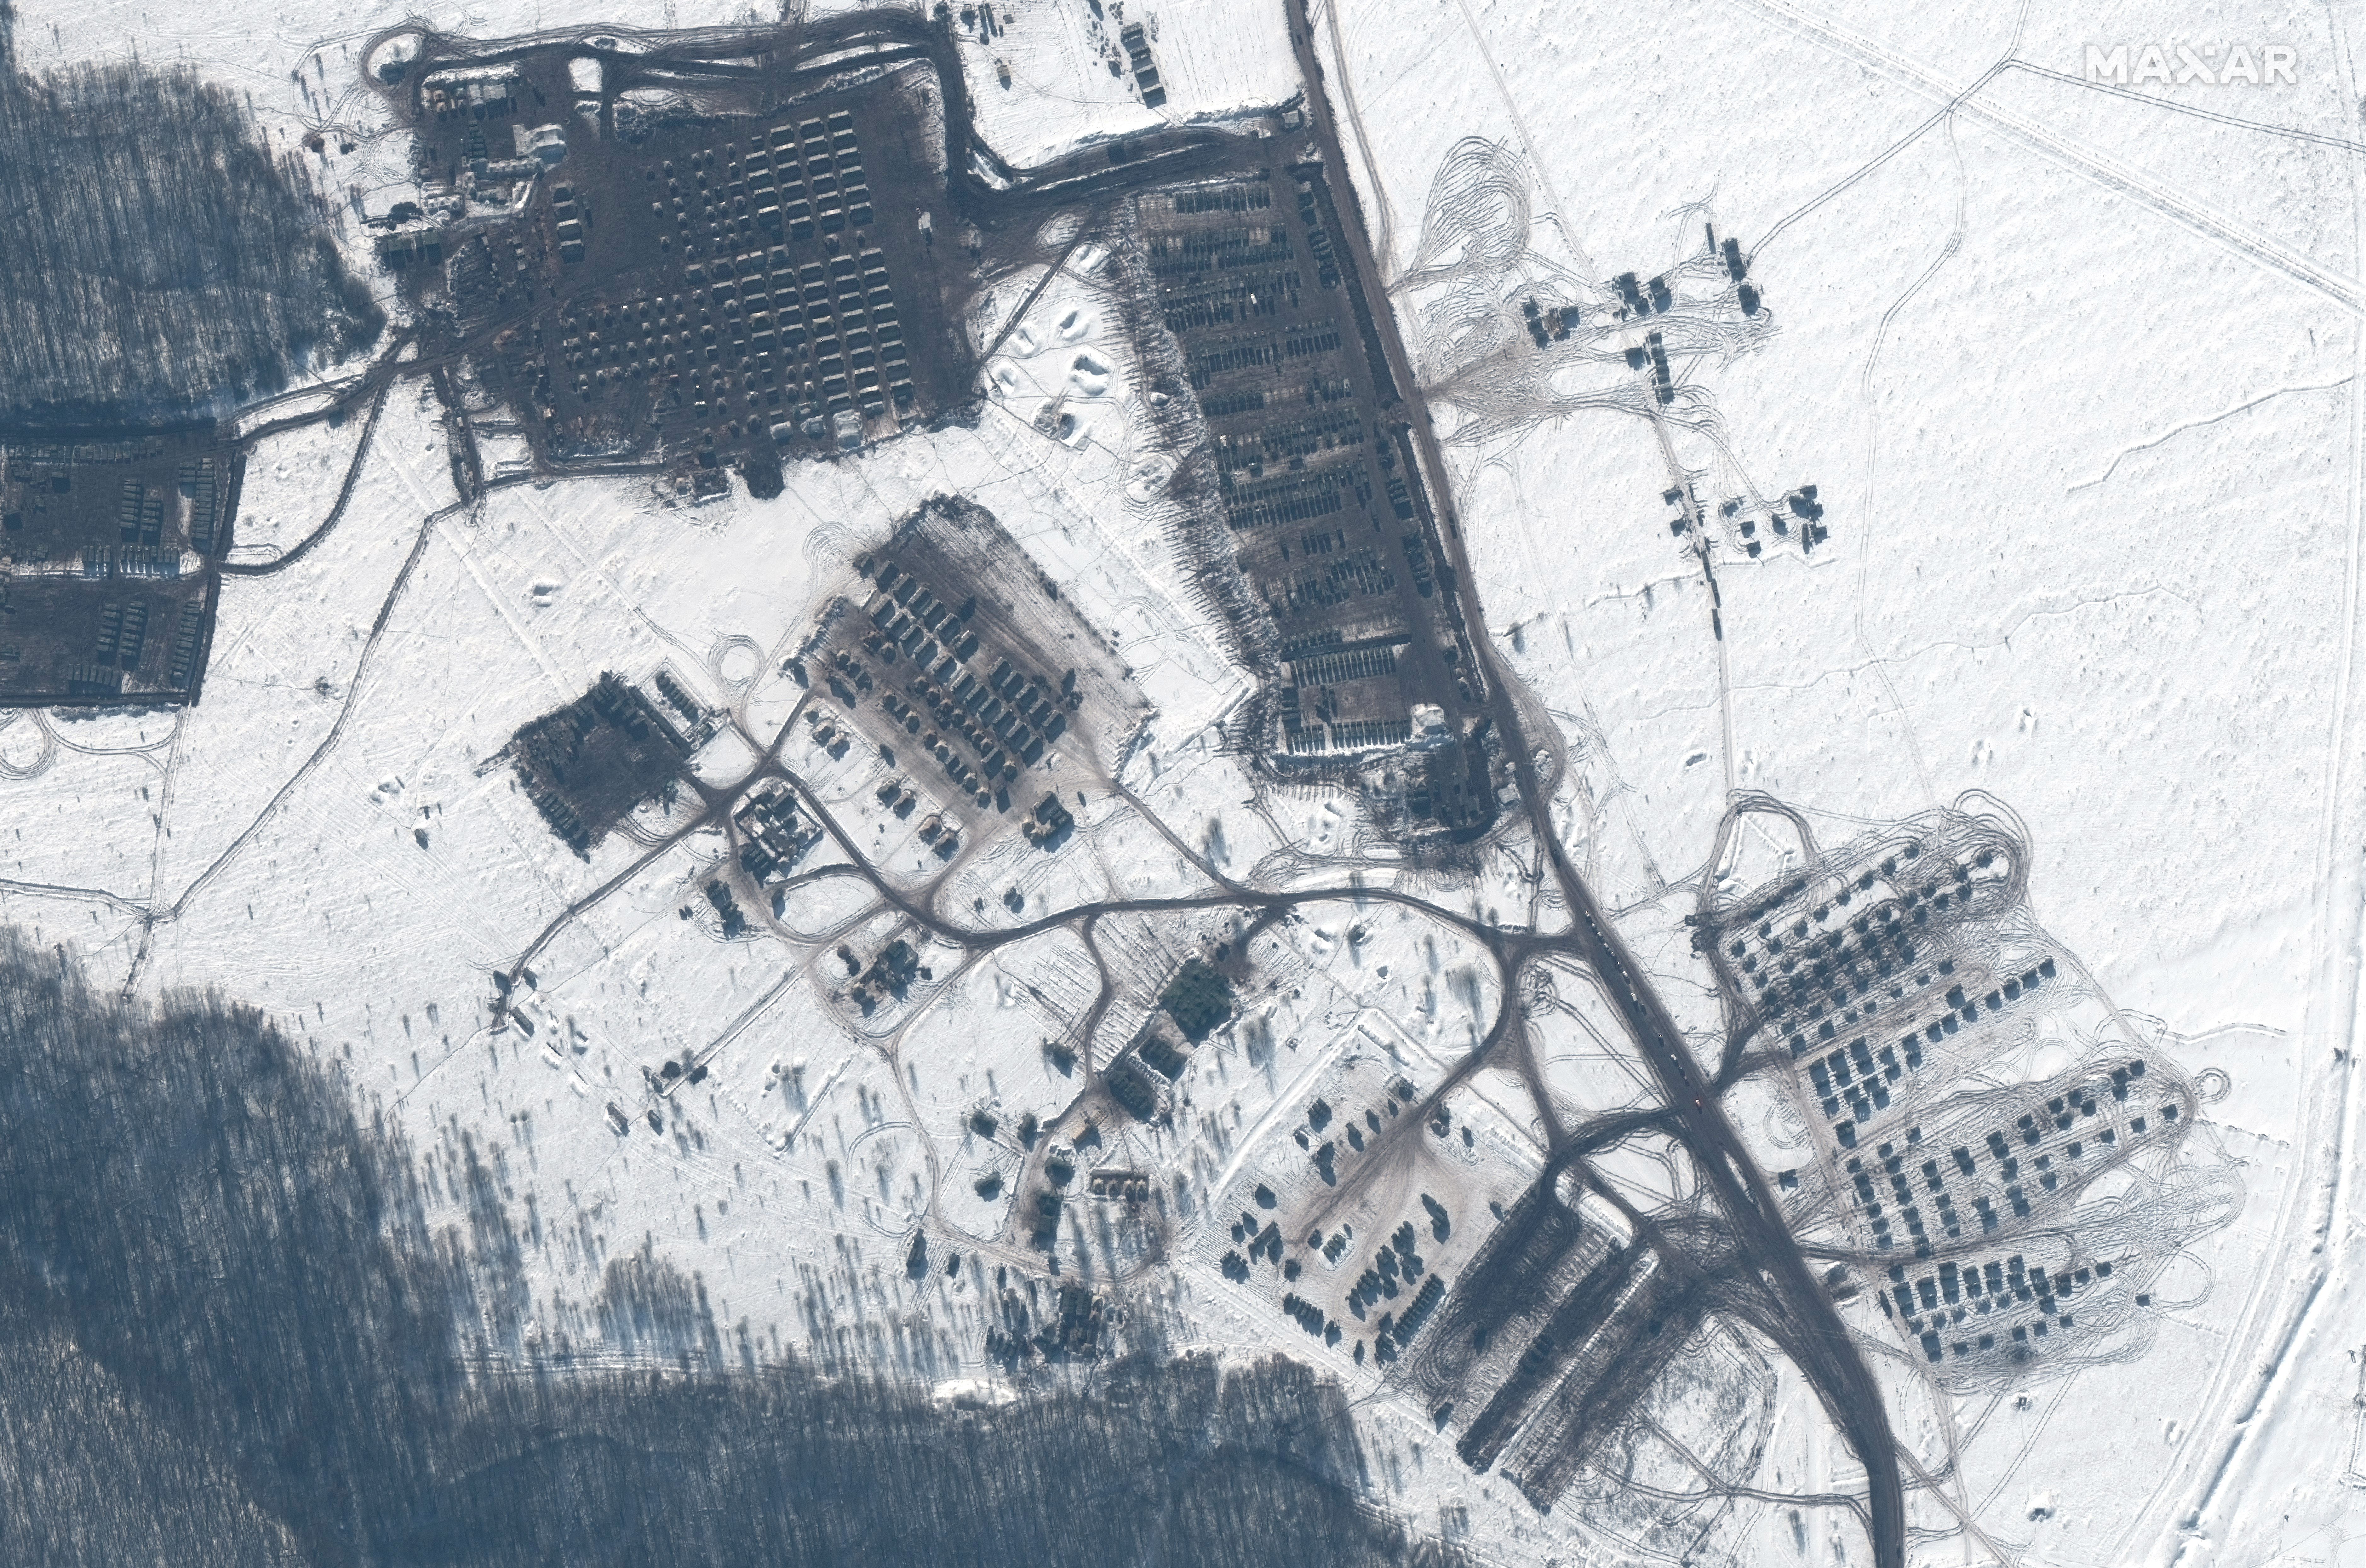 An image of troops and military equipment positioned near Kursk, Russia, captured on Feb. 16.